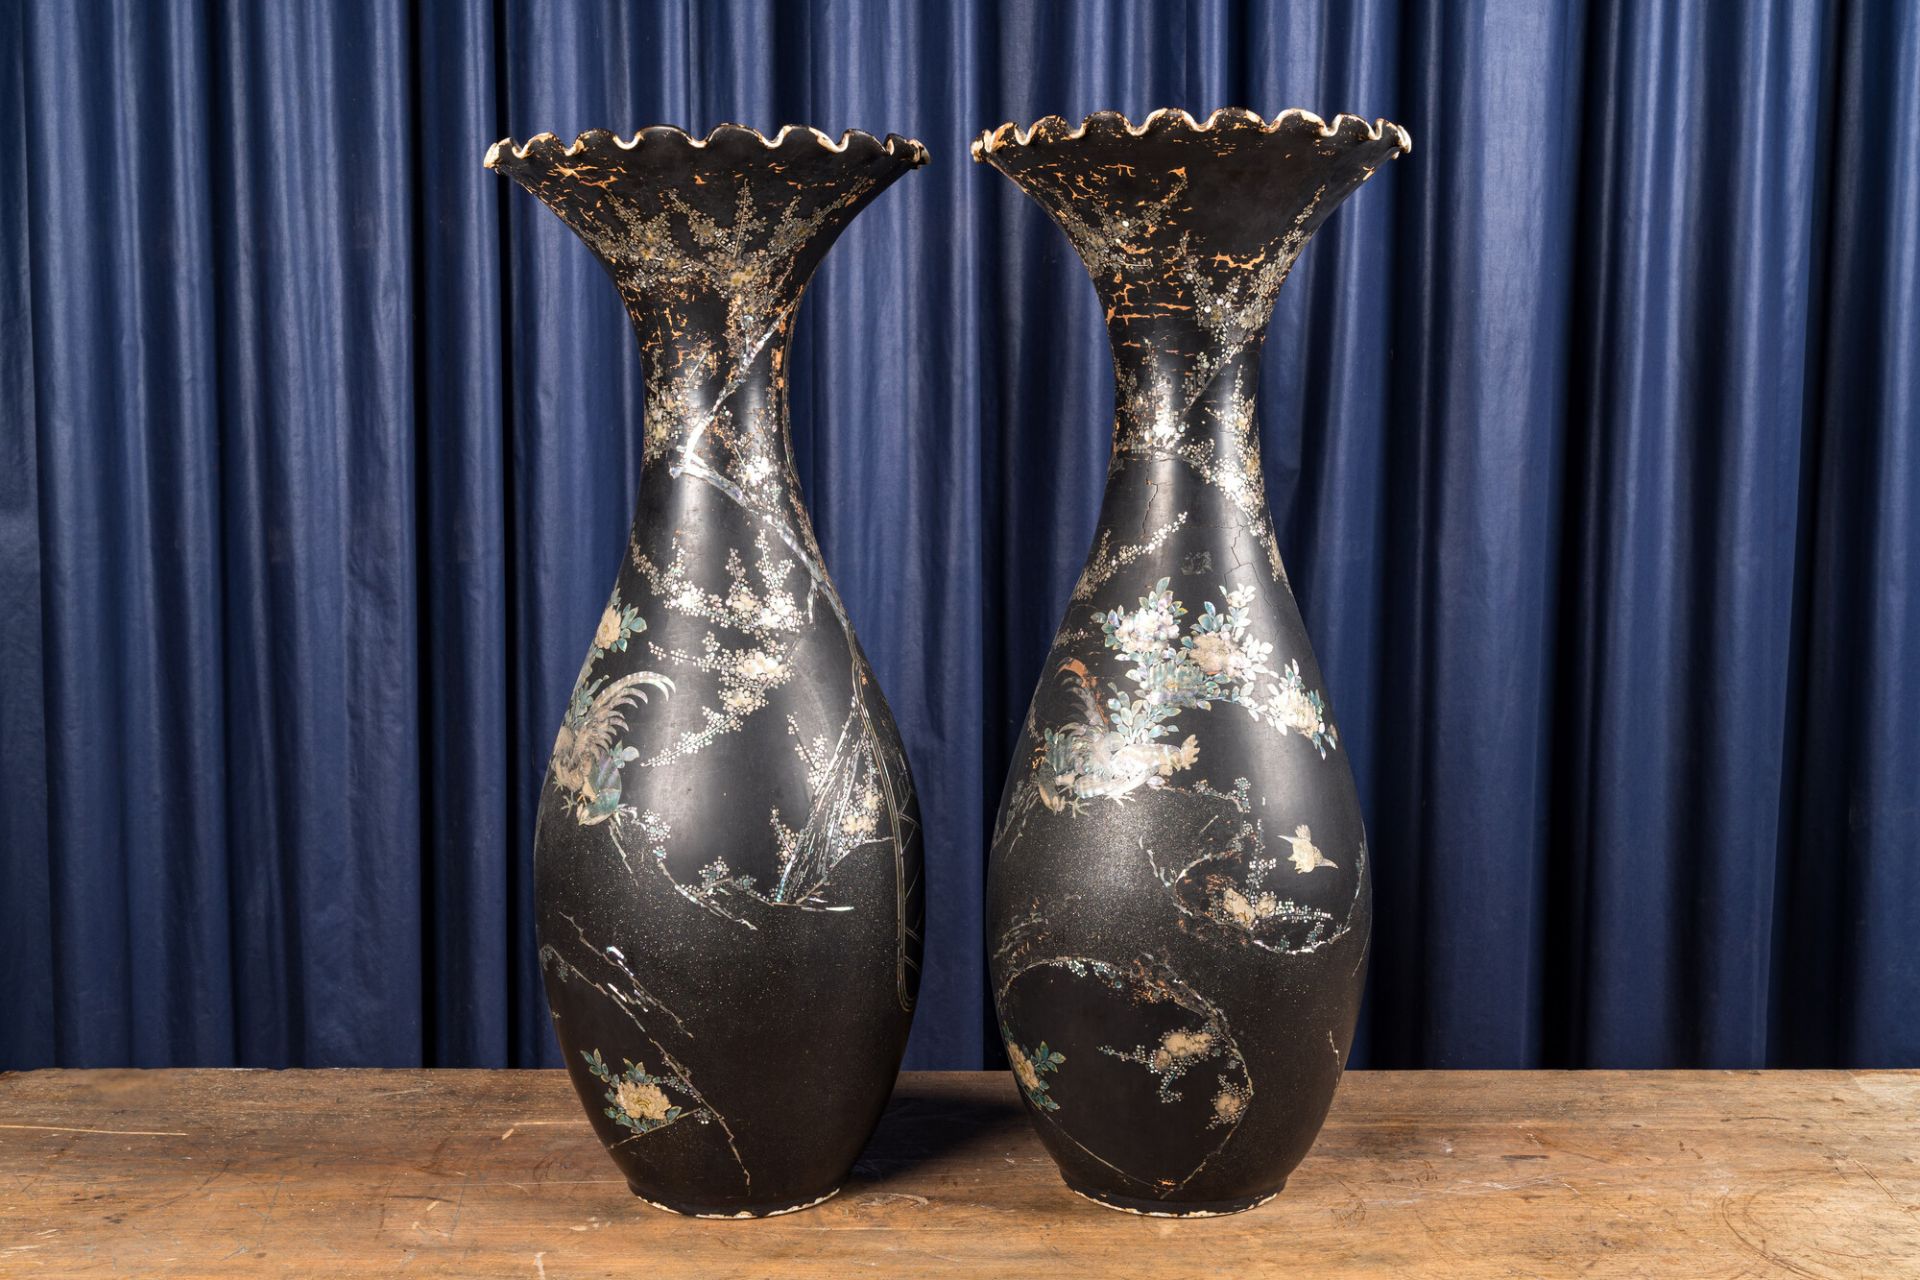 A pair of large mother-of-pearl-inlaid black-lacquered Japanese vases with fan-shaped rims, Meiji, 1